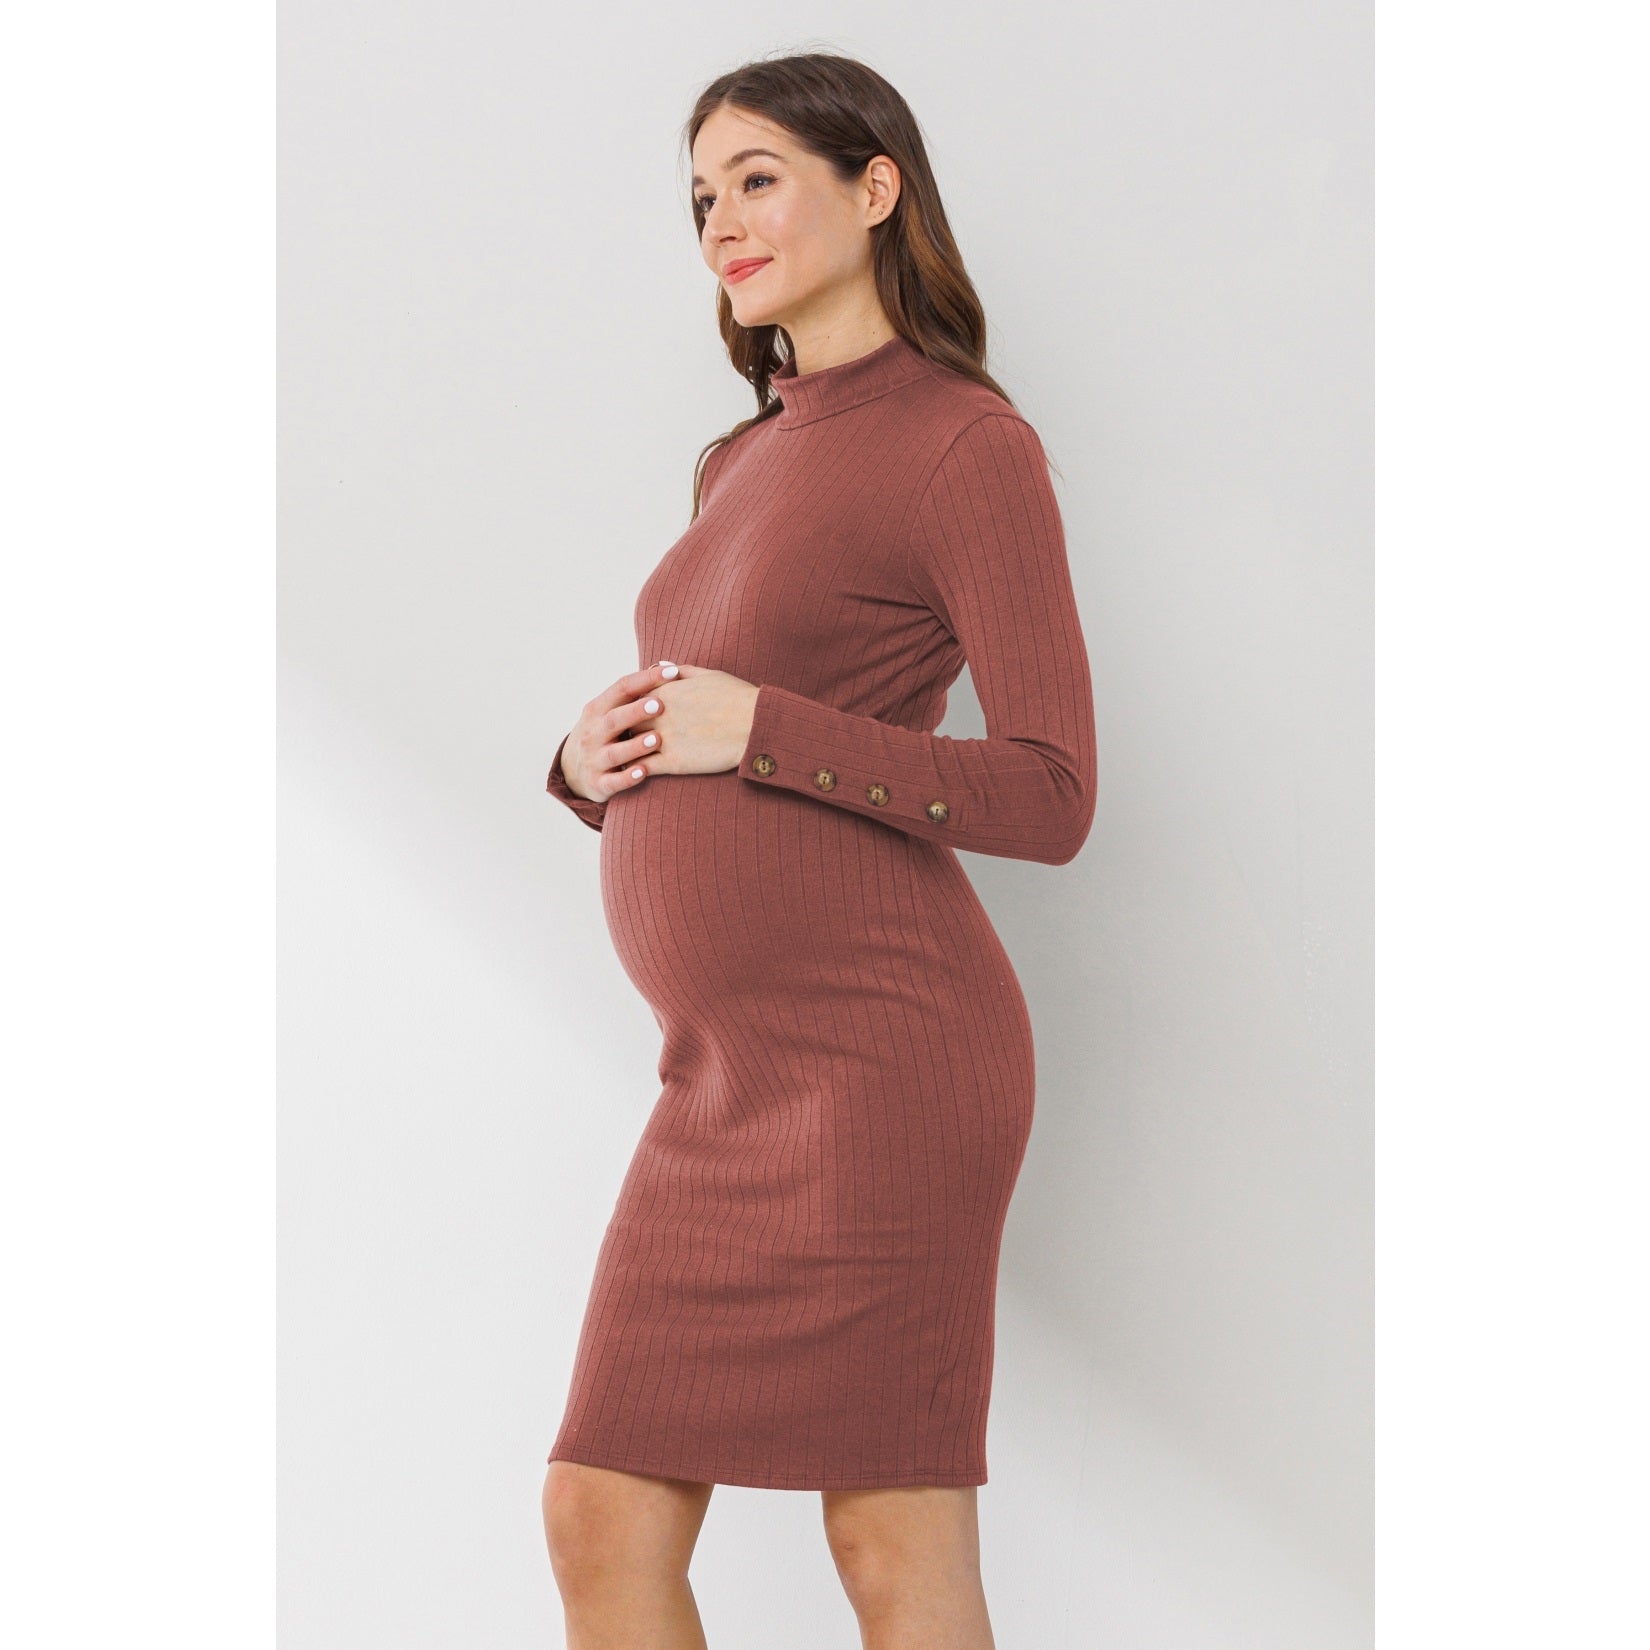 Ribbed Mock Neck Button Sleeve Maternity Dress in Rust  - Doodlebug's Children's Boutique